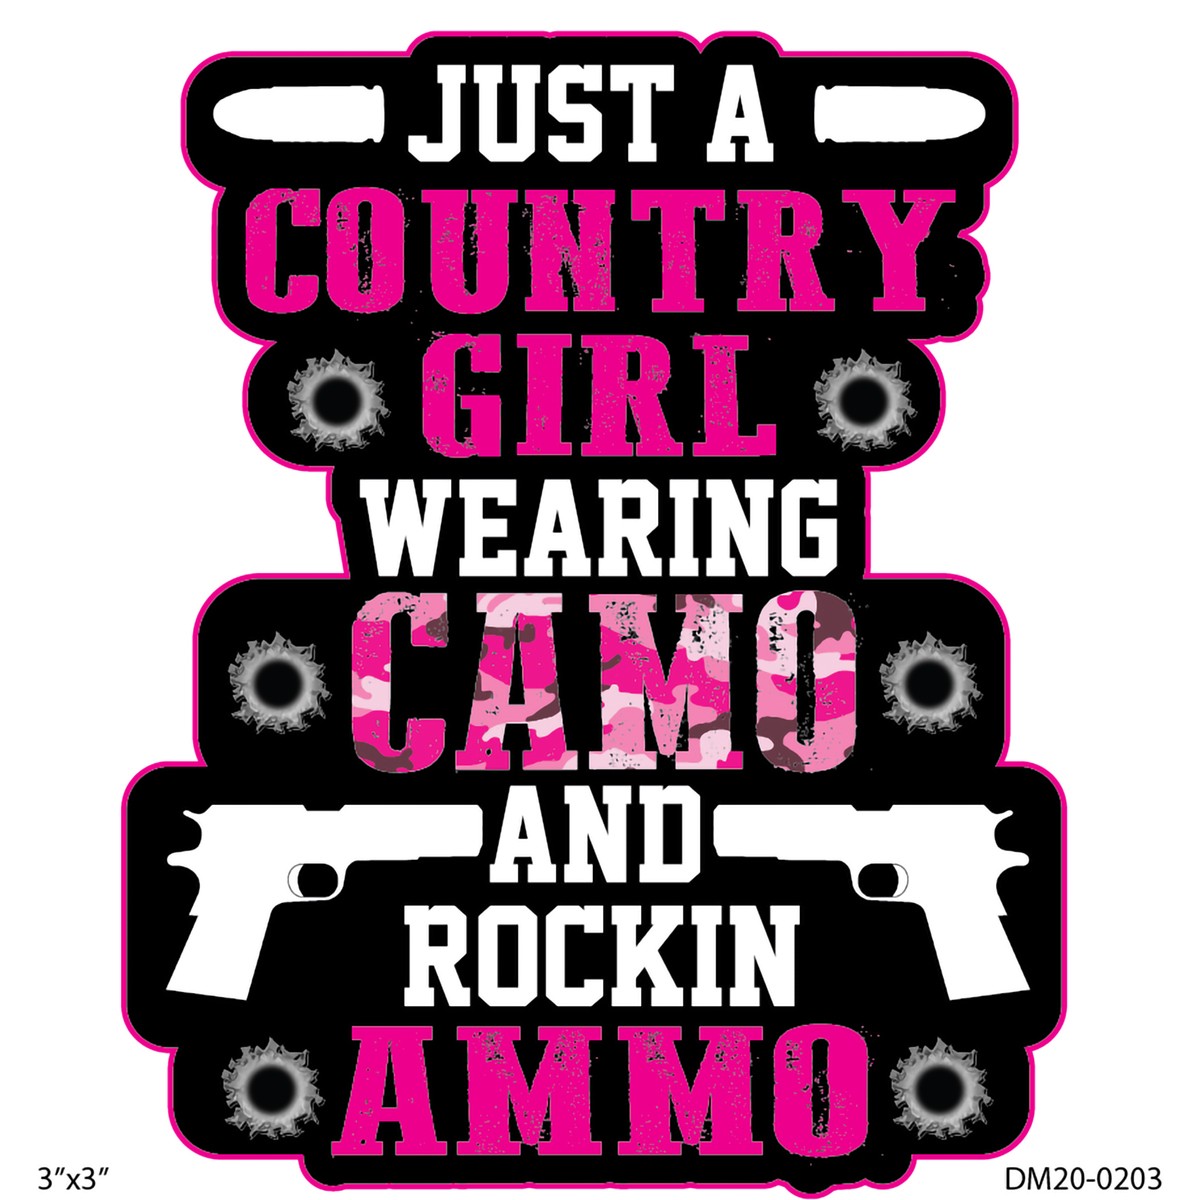 Decal Just a Country Chick 3in